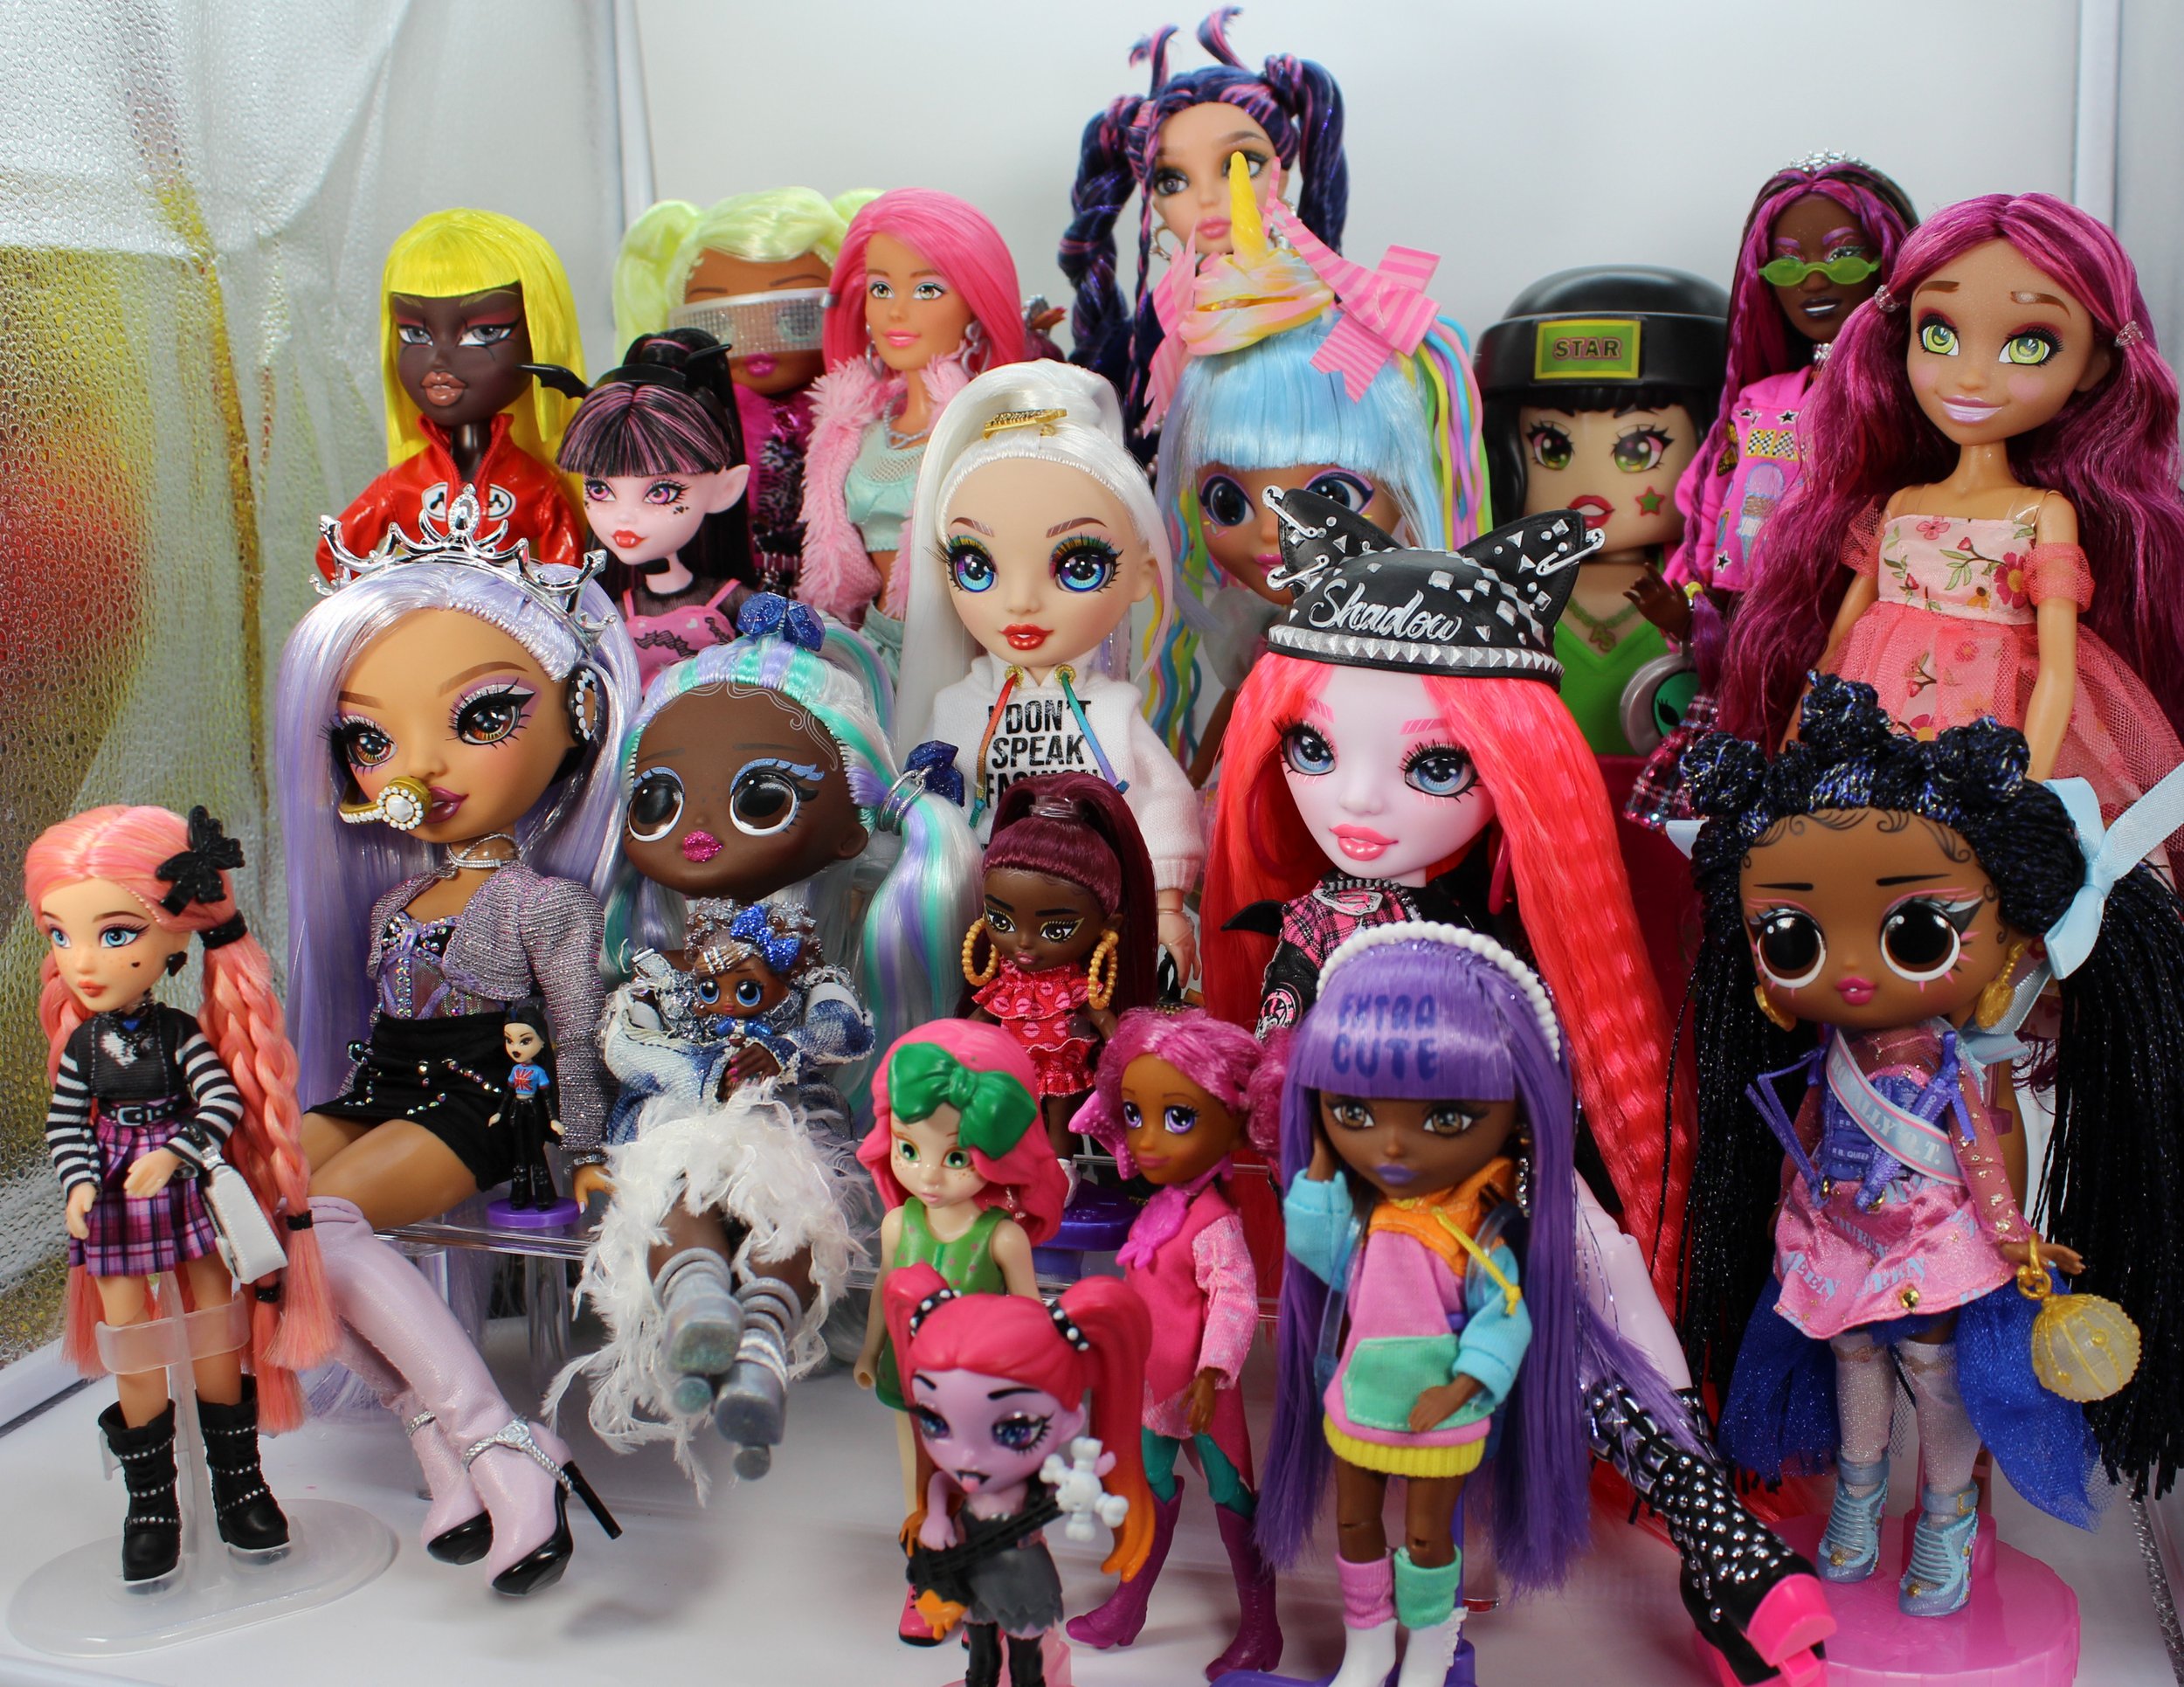 Think I might be obsessed with lol omg fierce dolls now, the